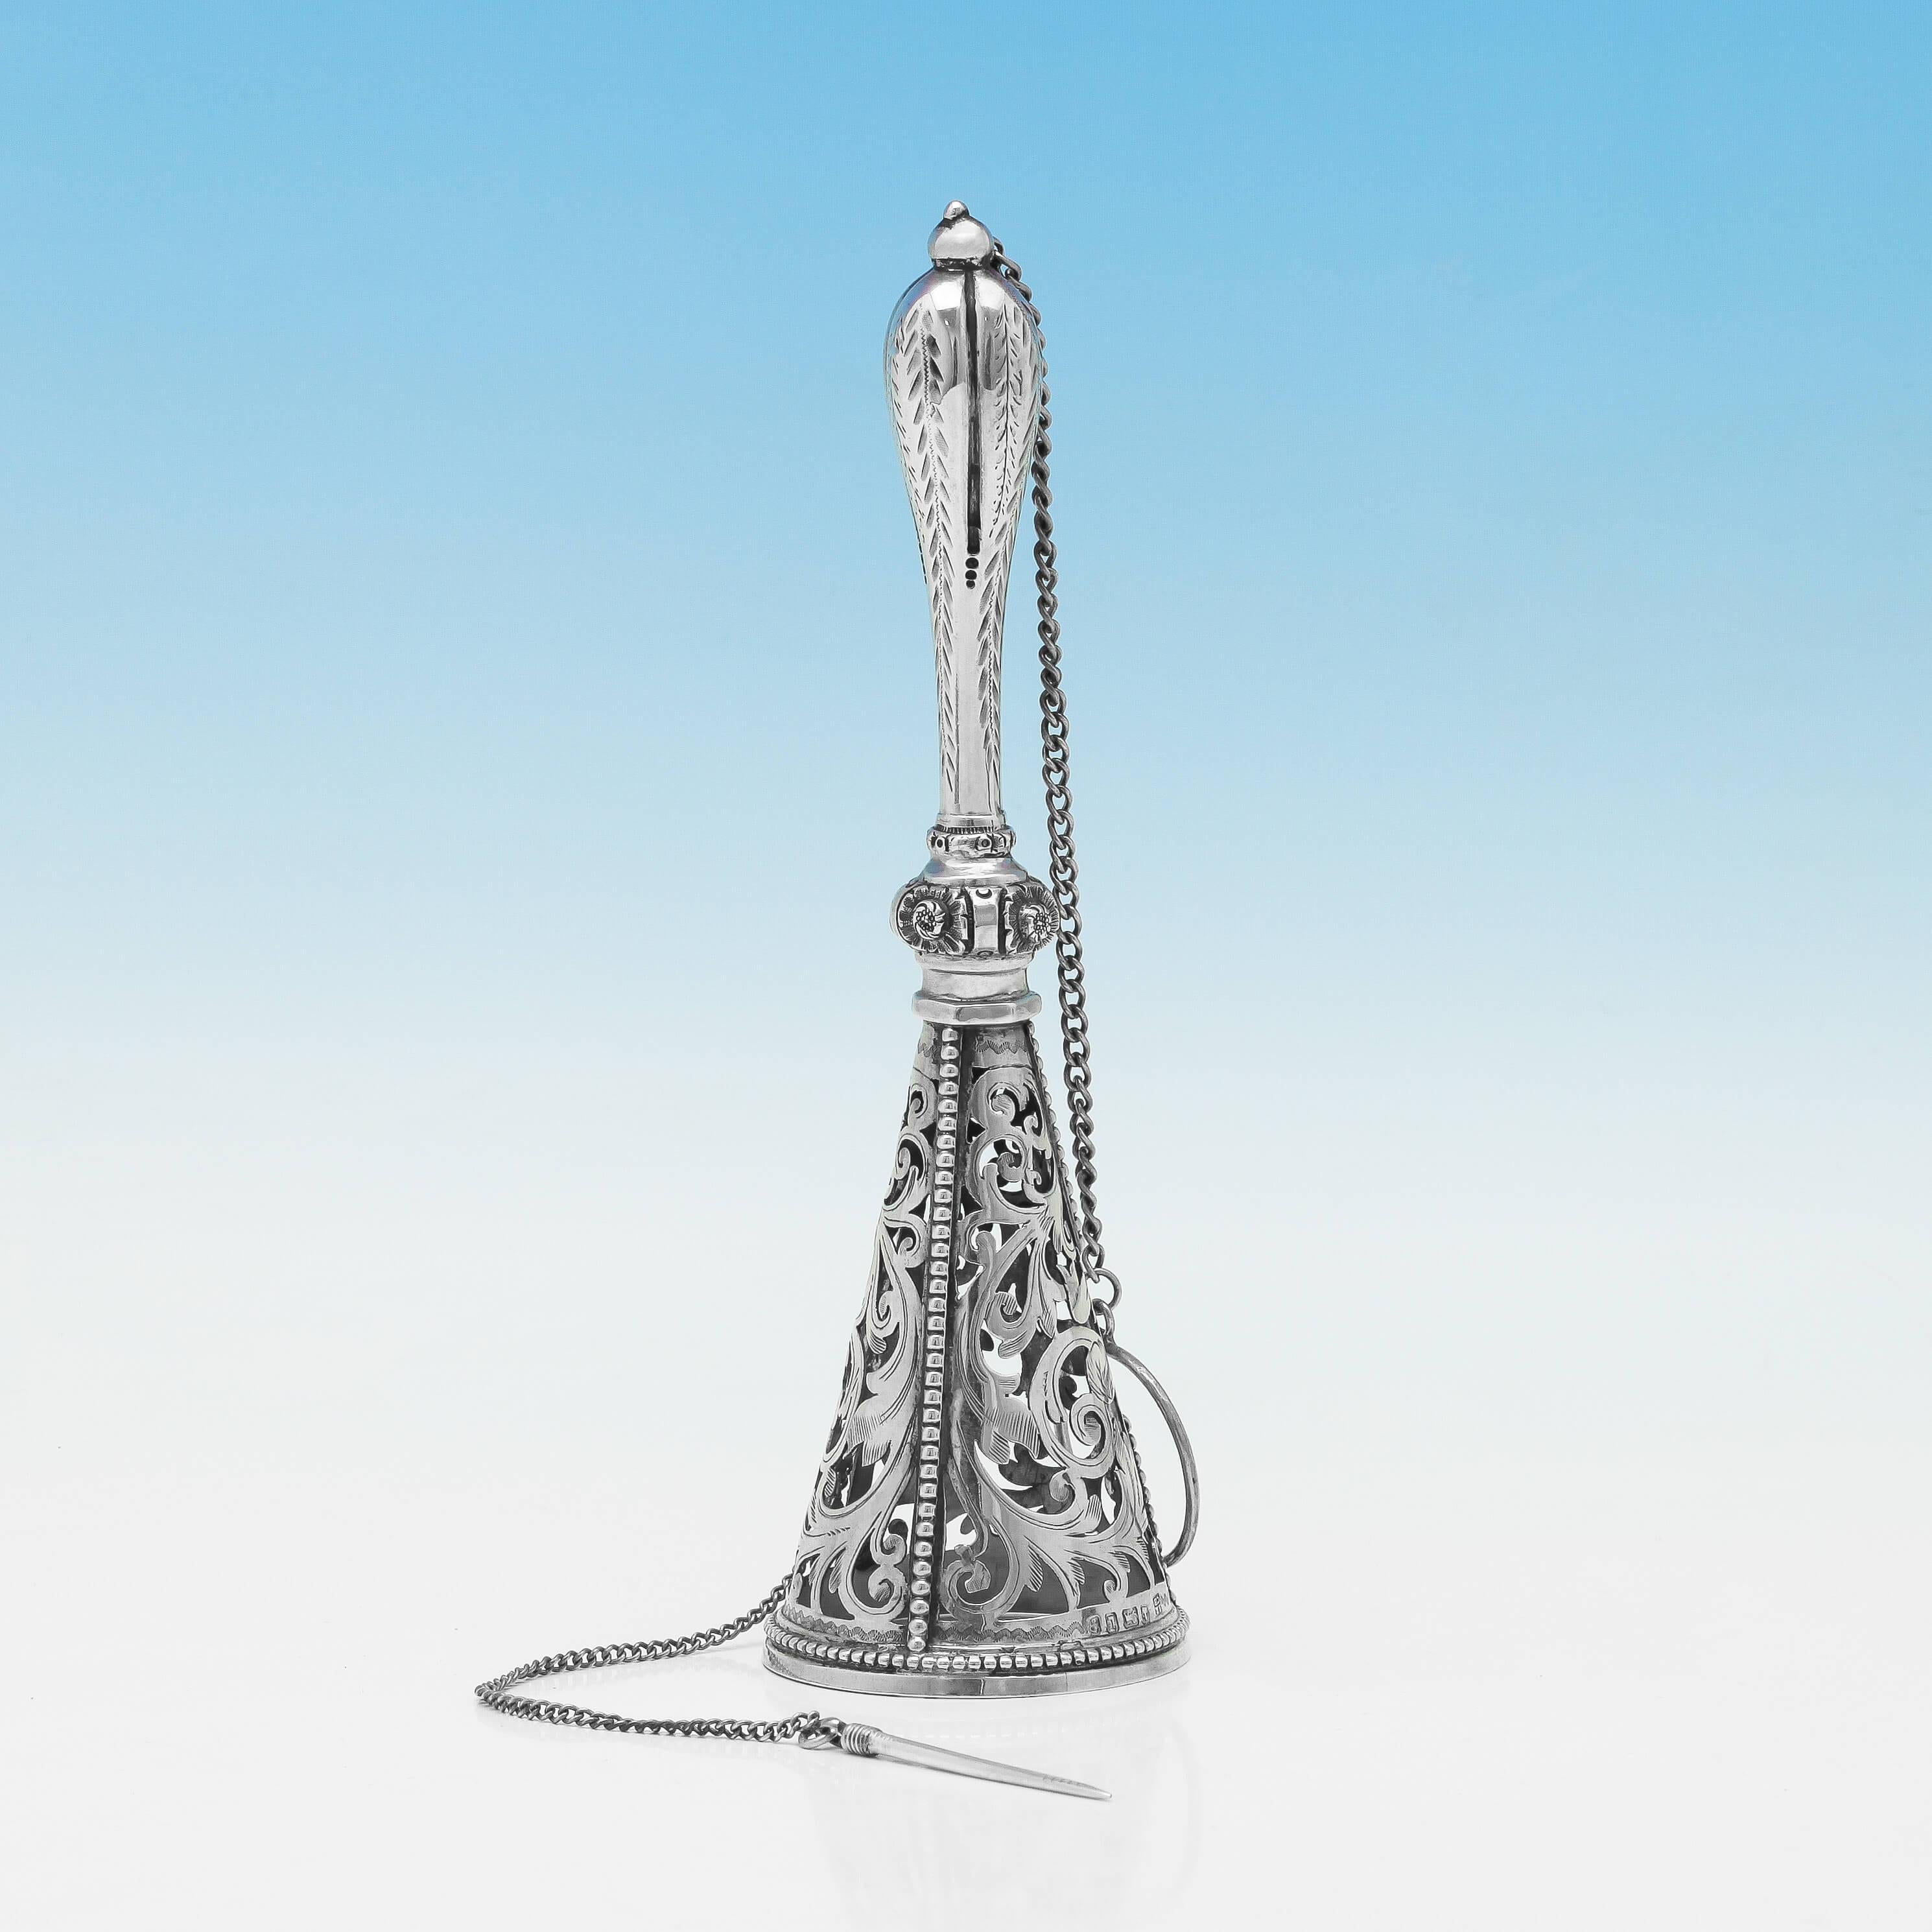 Hallmarked in Sheffield, 1878 by Roberts & Belk, this very attractive, Victorian, antique, sterling silver Posey holder, or tussy mussy, has scroll pierced decoration at the top, and beaded detailing throughout. It has an attached chain for the